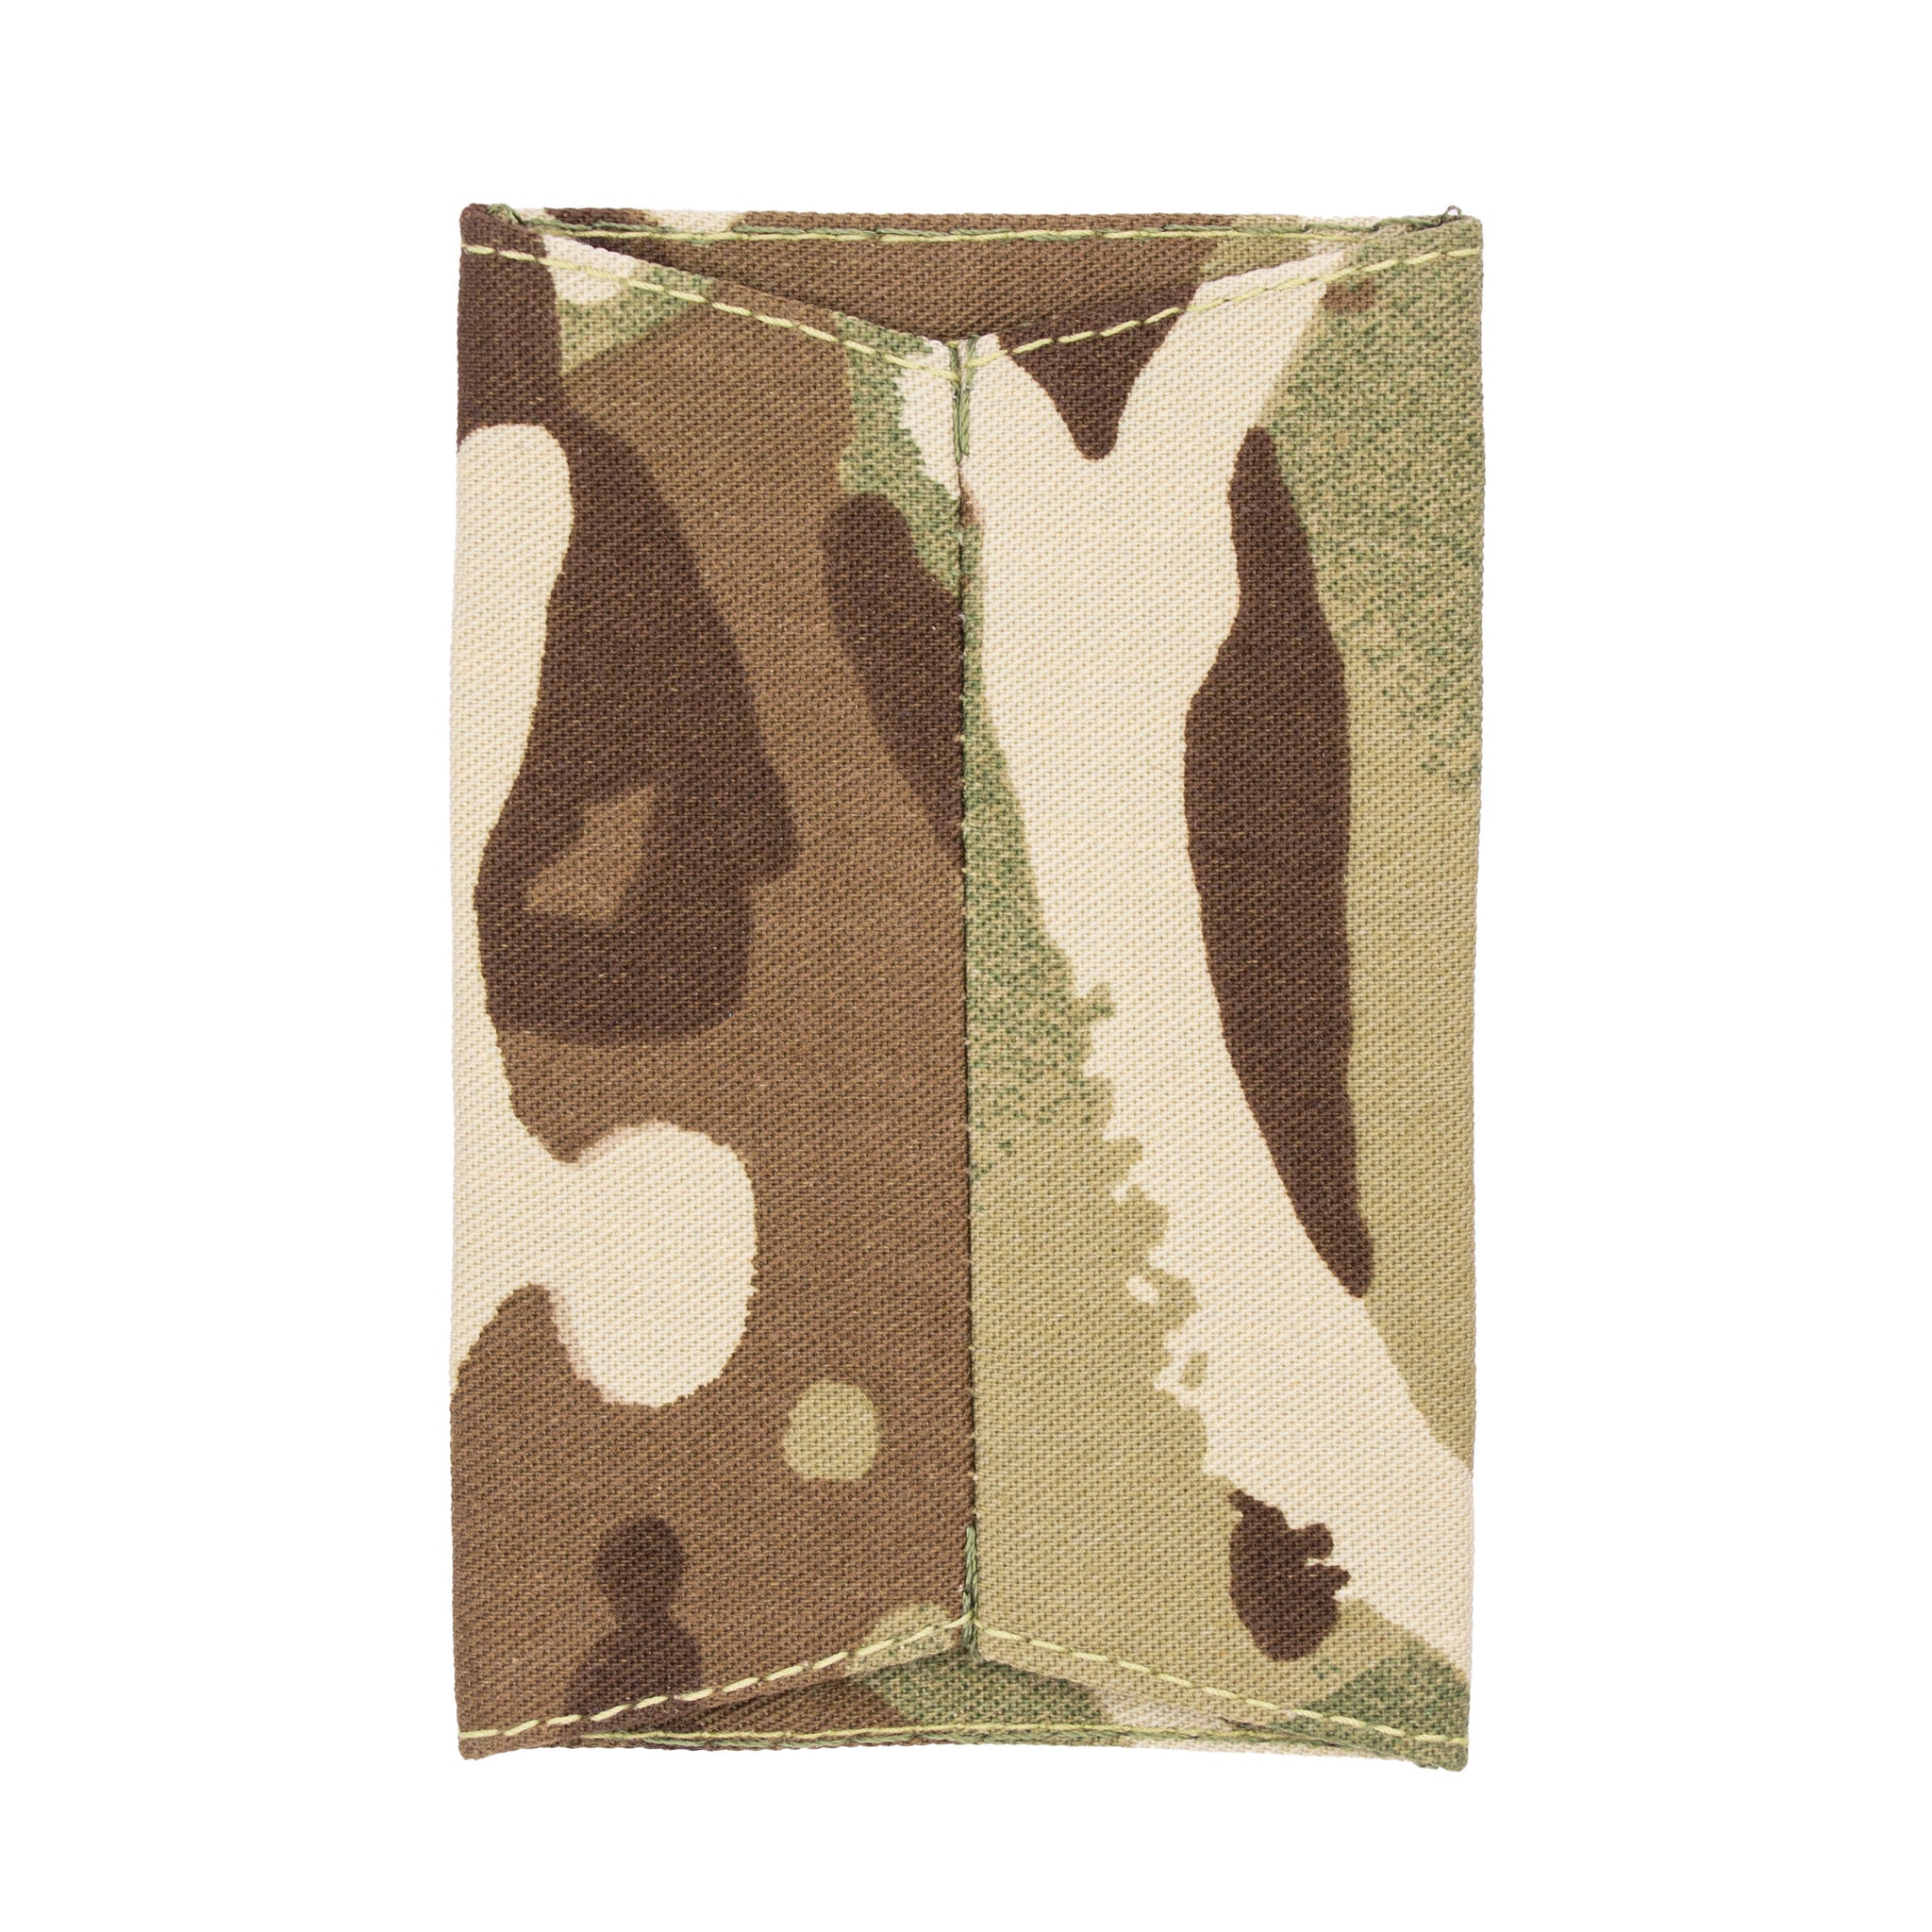 Warrant Officer Class 2 (WO2) Slider Epaulette For The British Army Cadet Force (ACF)